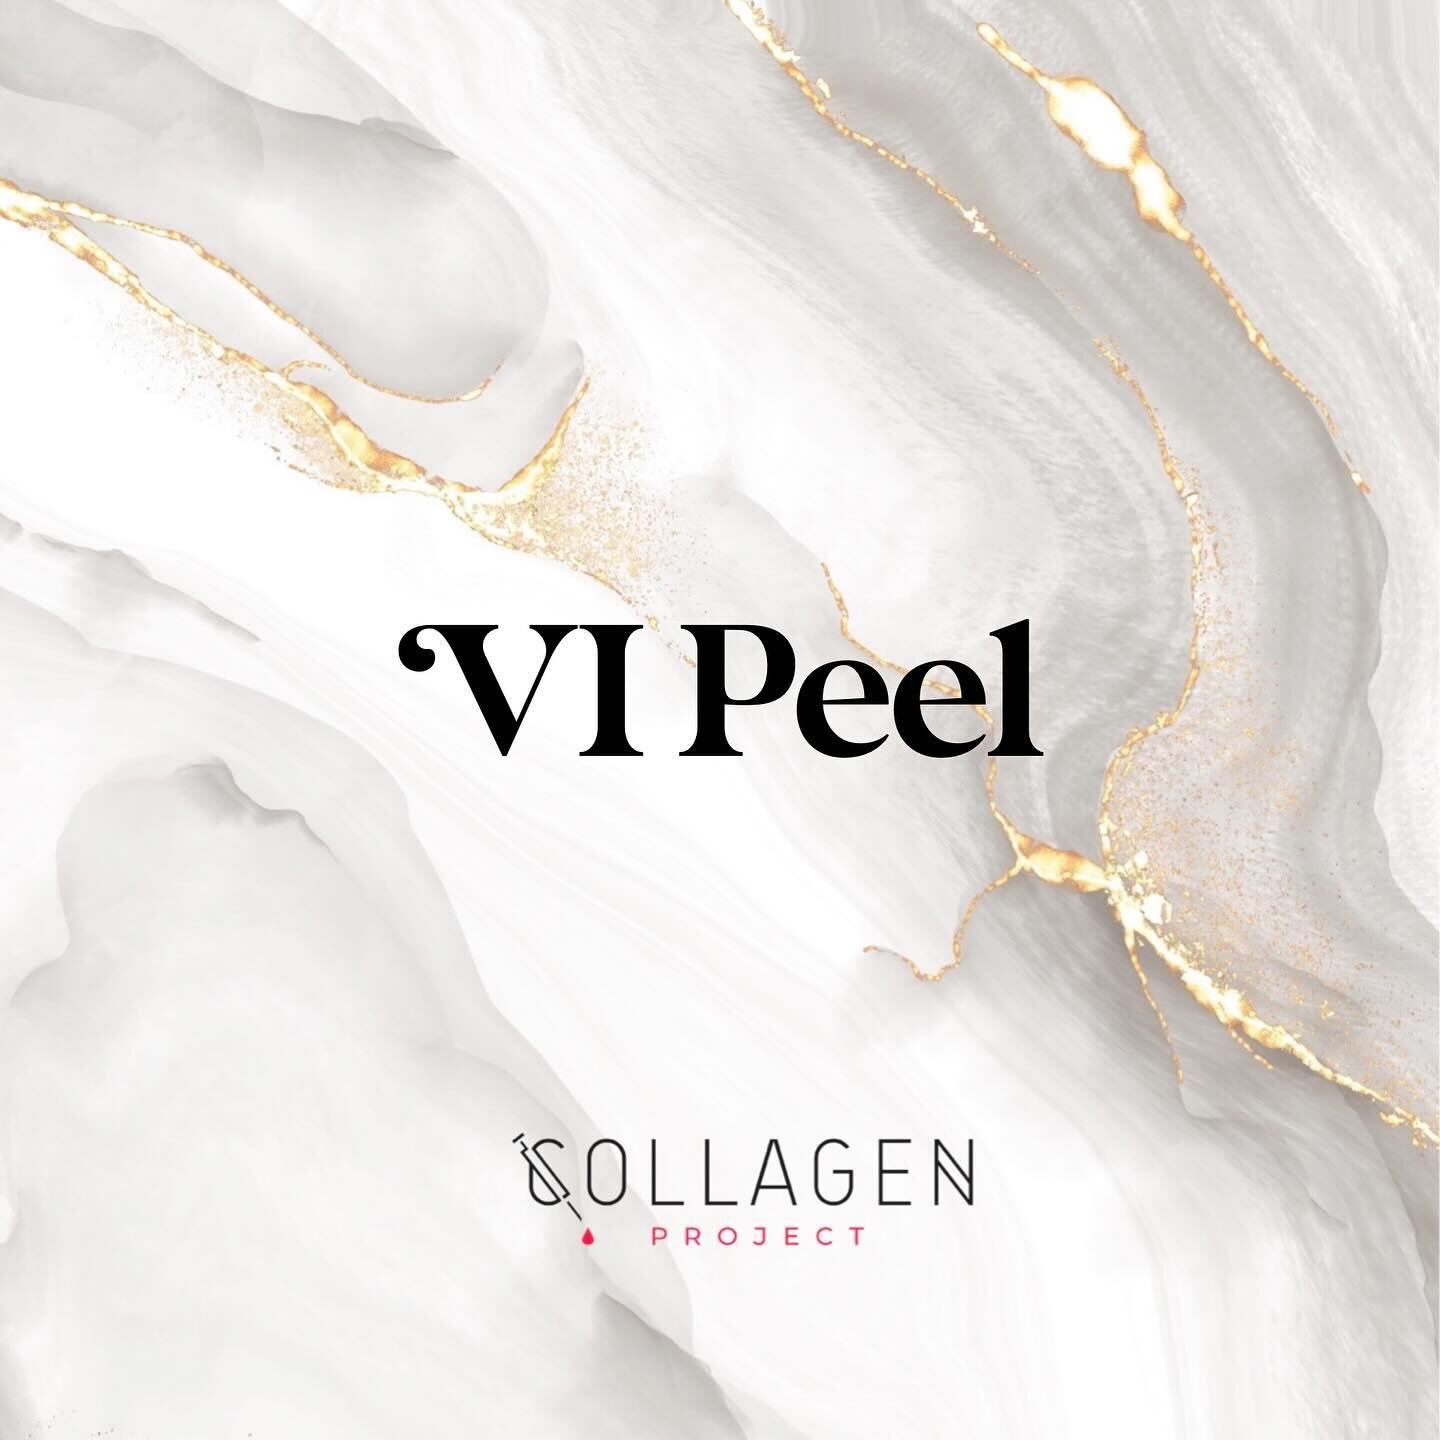 ViPeel

When you think of Collagen Project, chances are you think of it as the best place for Morpheus8 and Exosomes in South Florida. But did you know we also offer VI Peel Treatments at Collagen Project in Miami Beach. Collagen Project is, after al